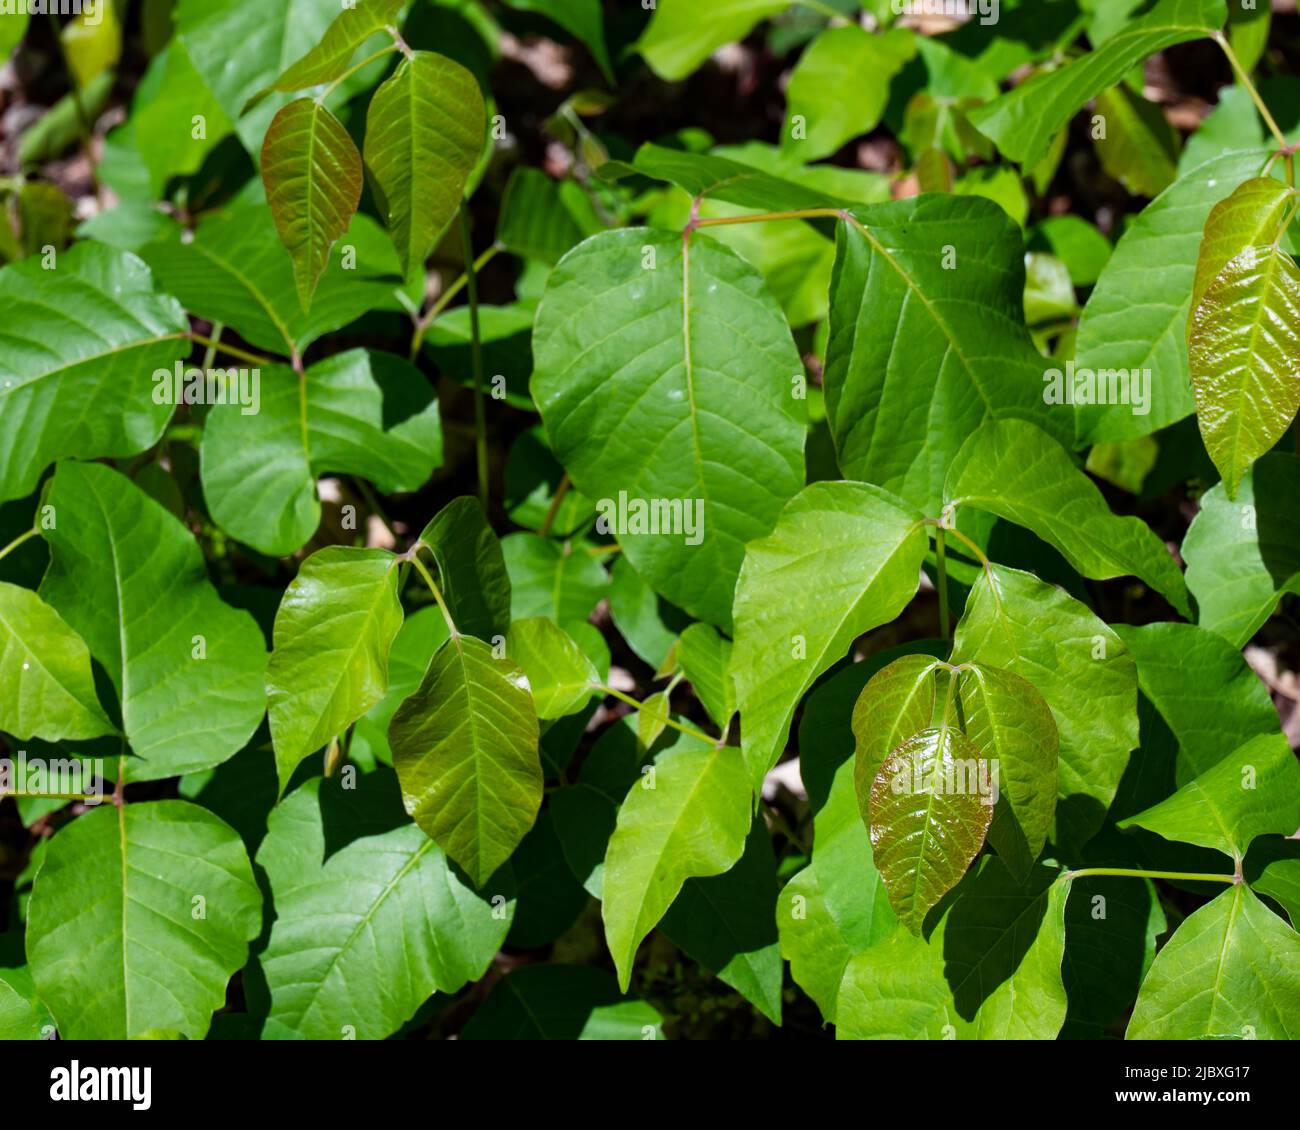 A patch of poison ivy, a allergenic plant,Toxicodendron radicans, growing in the Adirondack Mountains, NY USA causing contact dermatitis Stock Photo